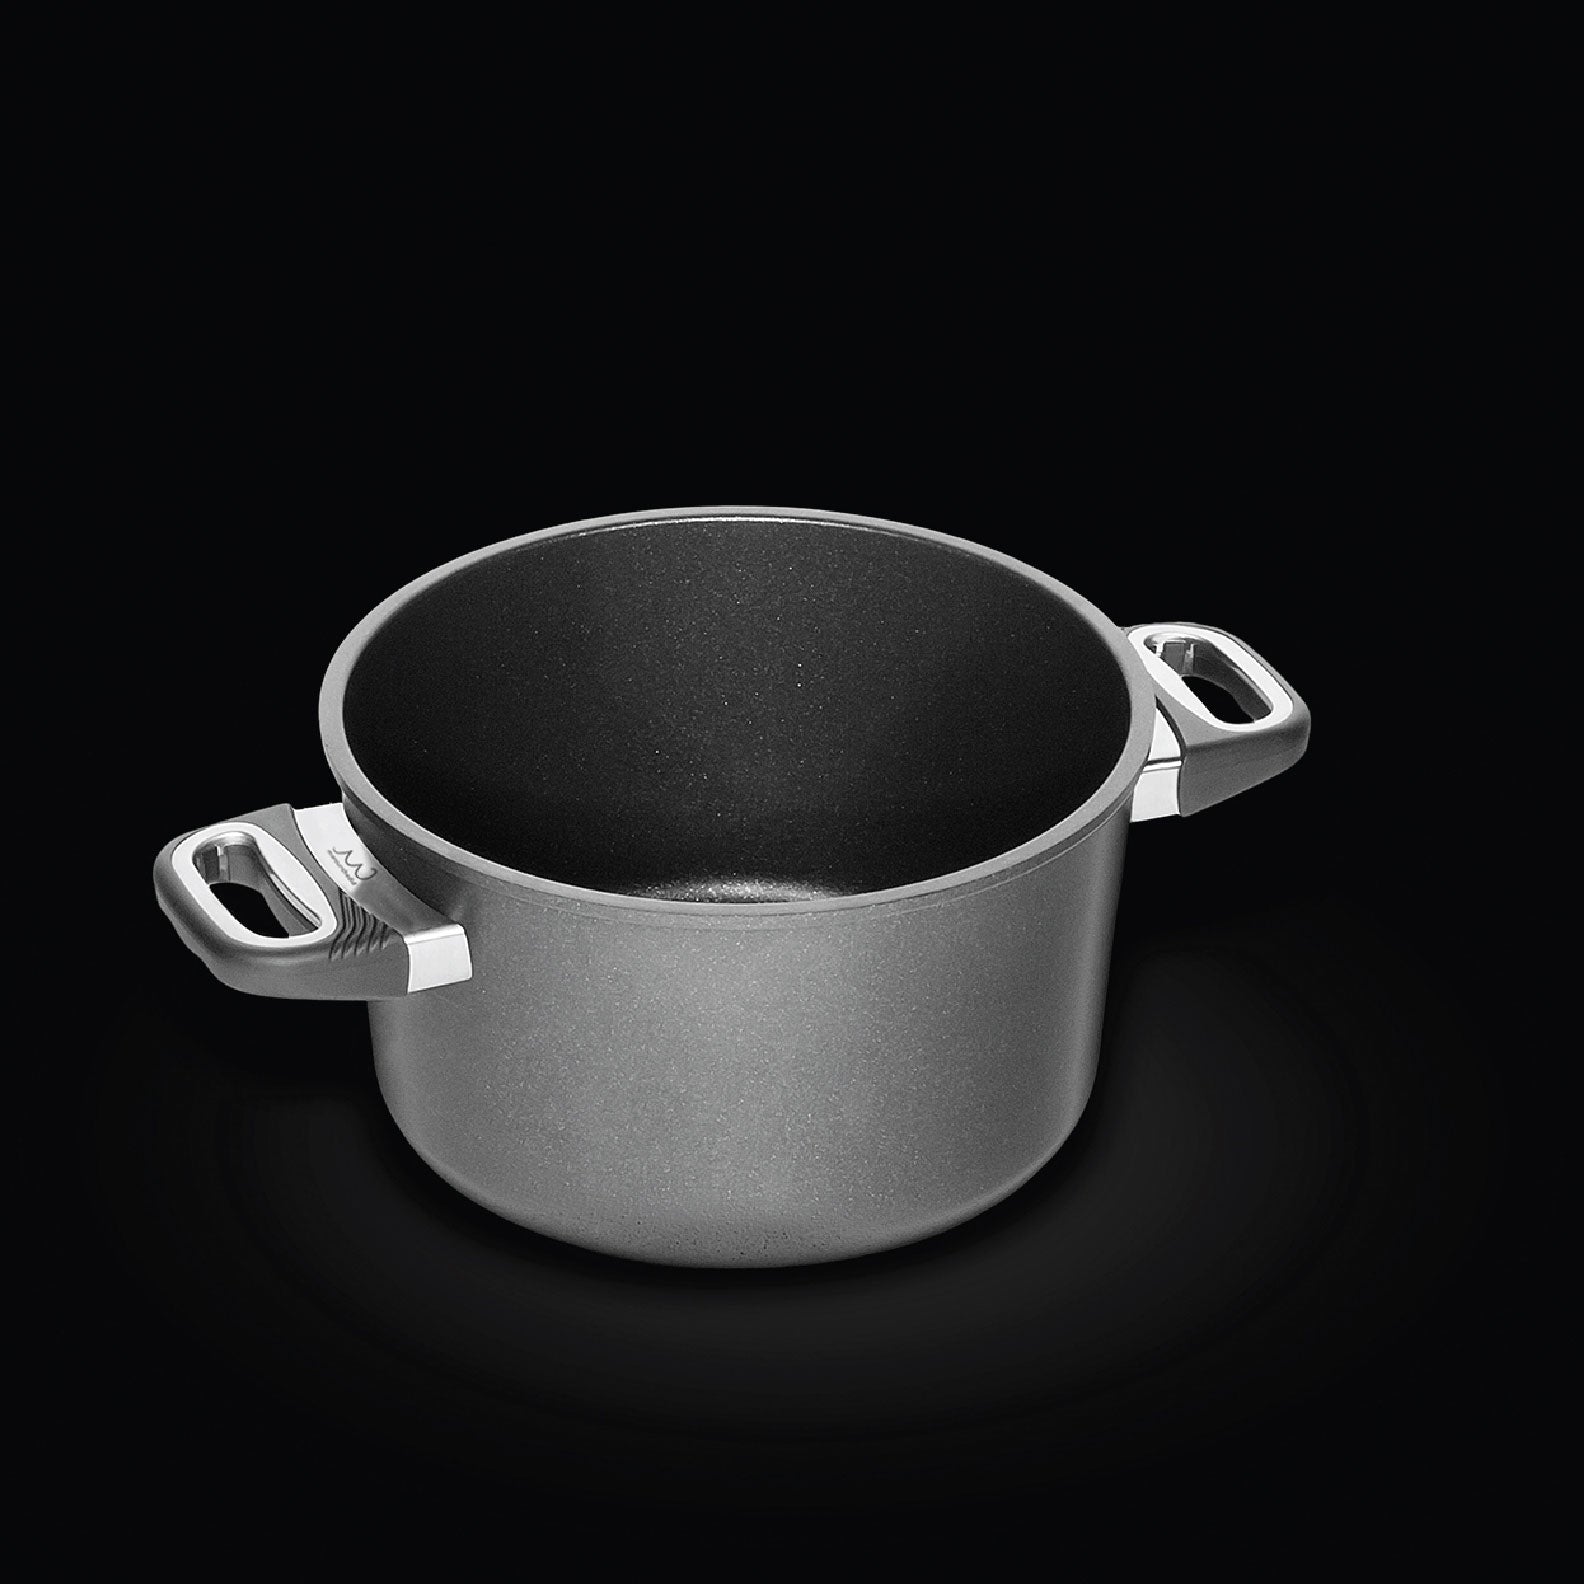 Pot Item with Side Handles